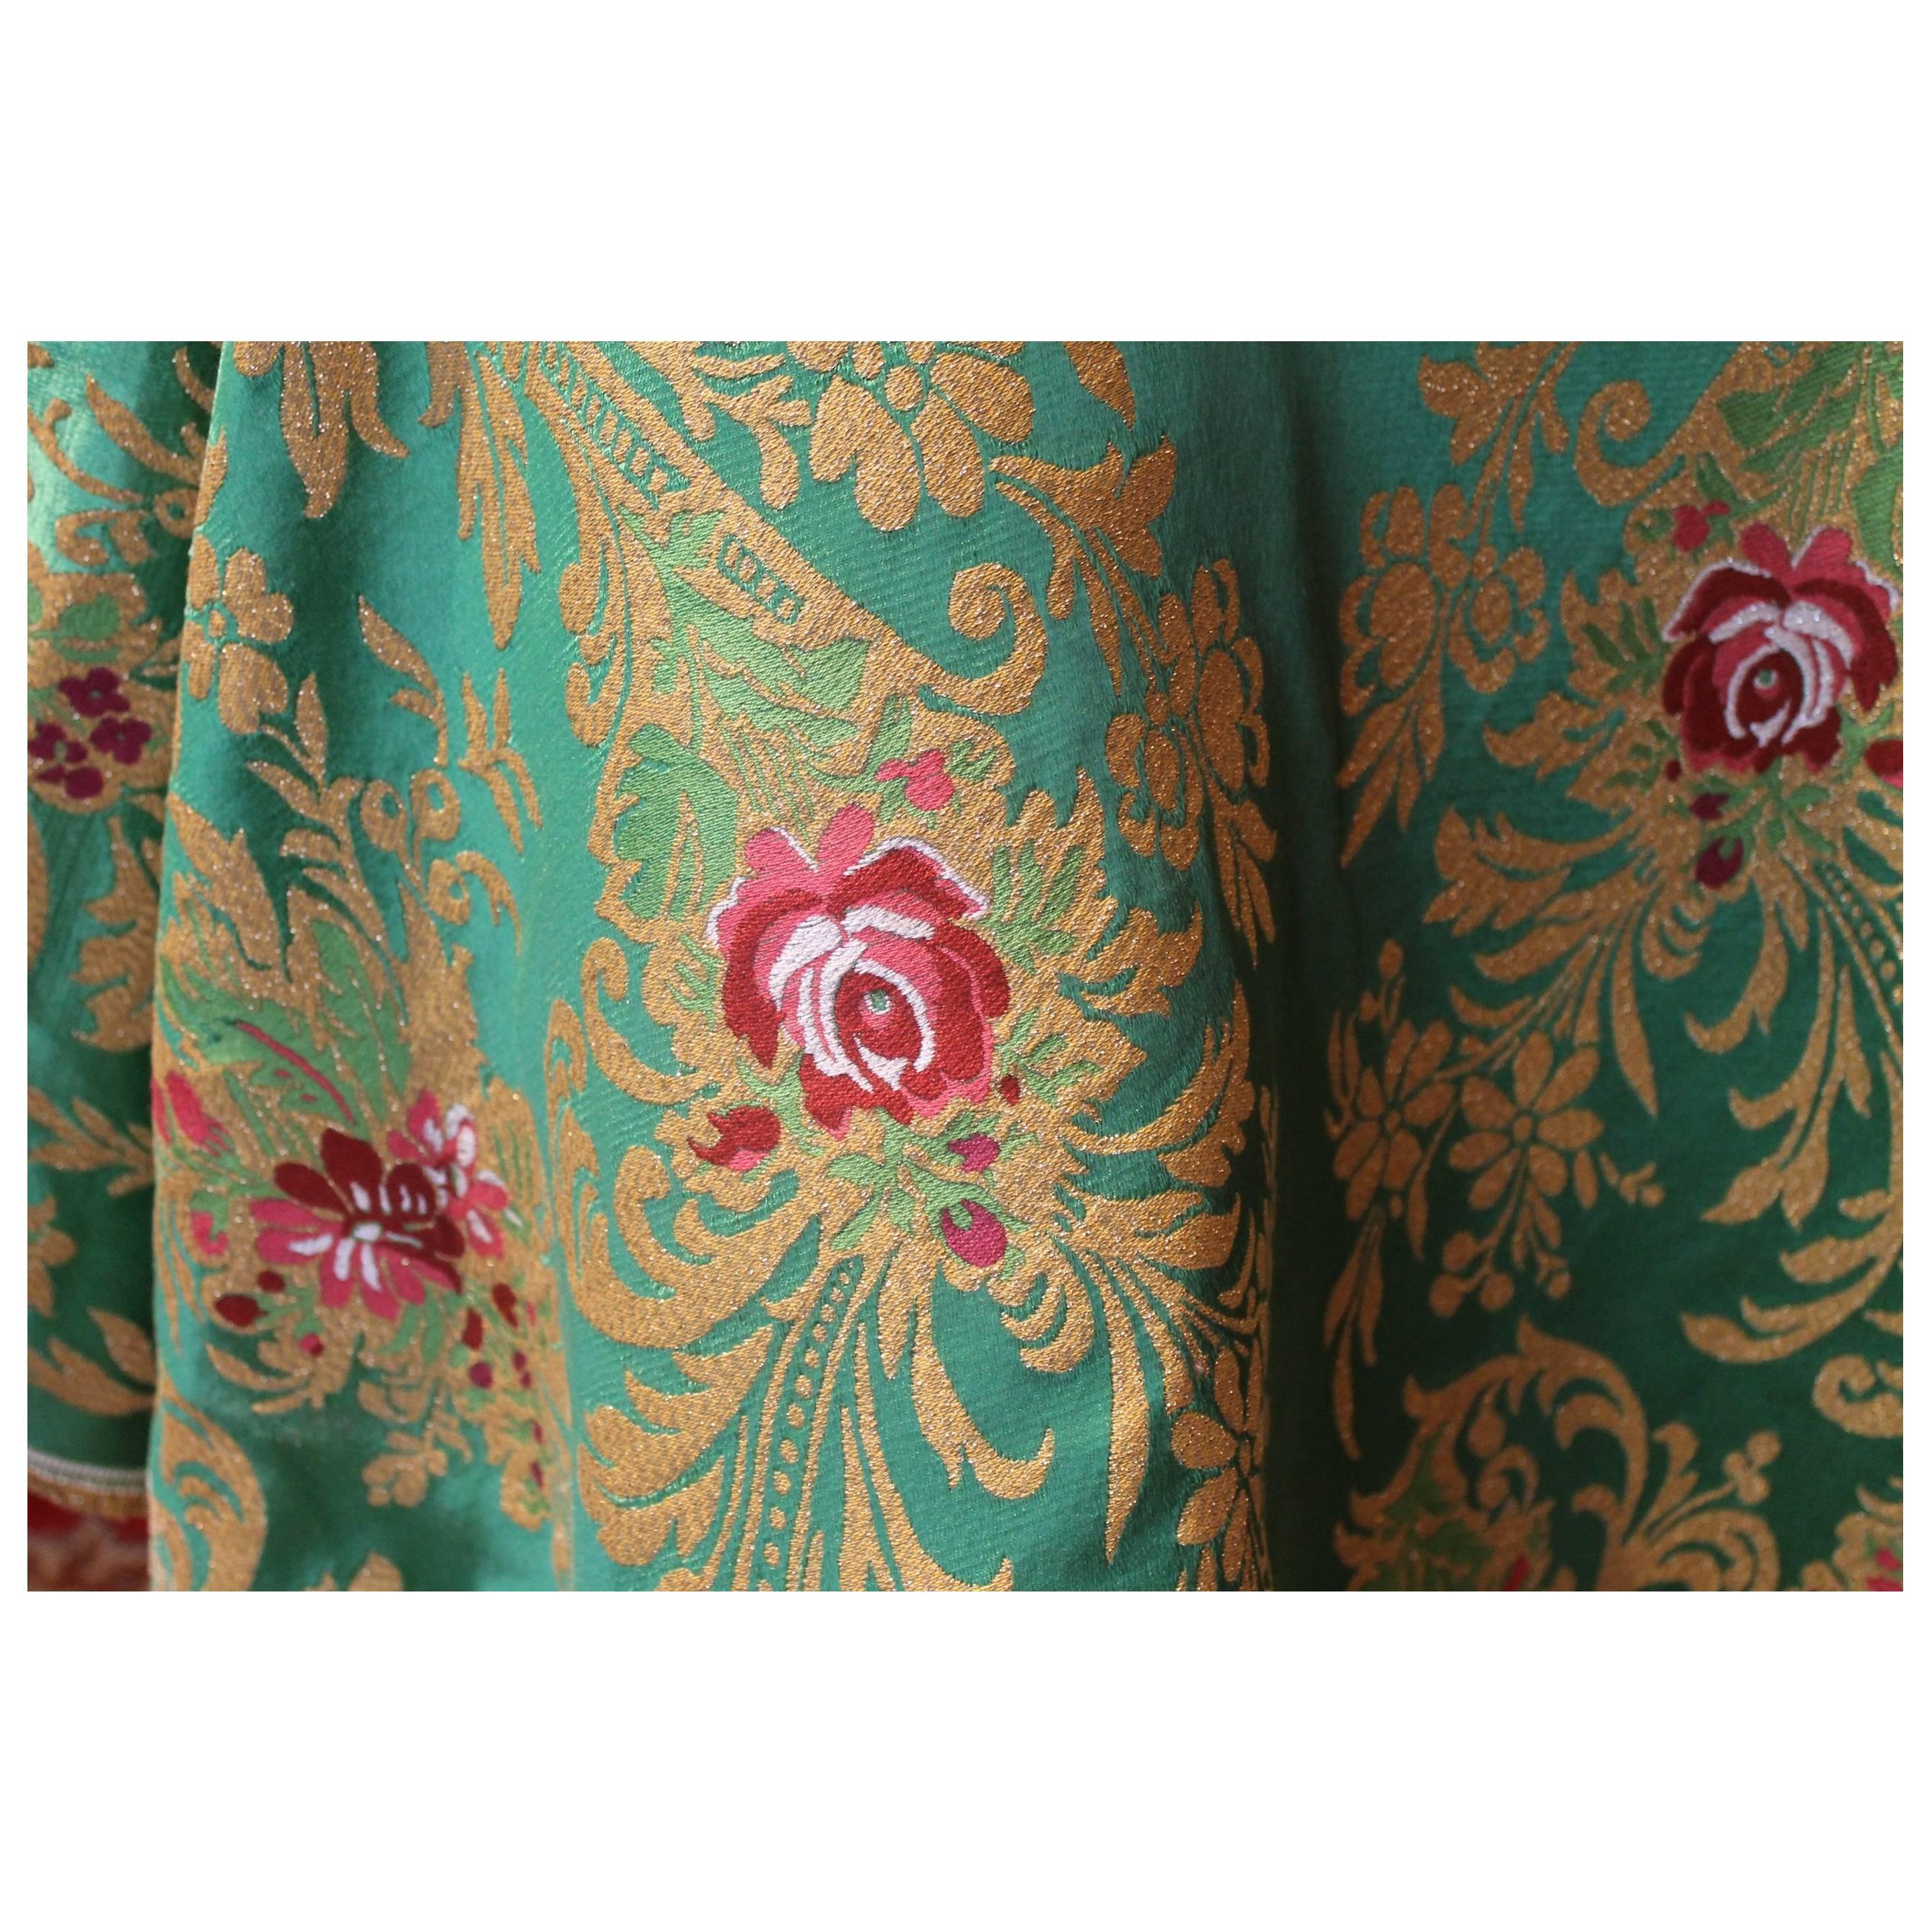 Italian Blue Silk Blend Brocade Fabric with Red Roses and Gold Floral Patterns For Sale 8